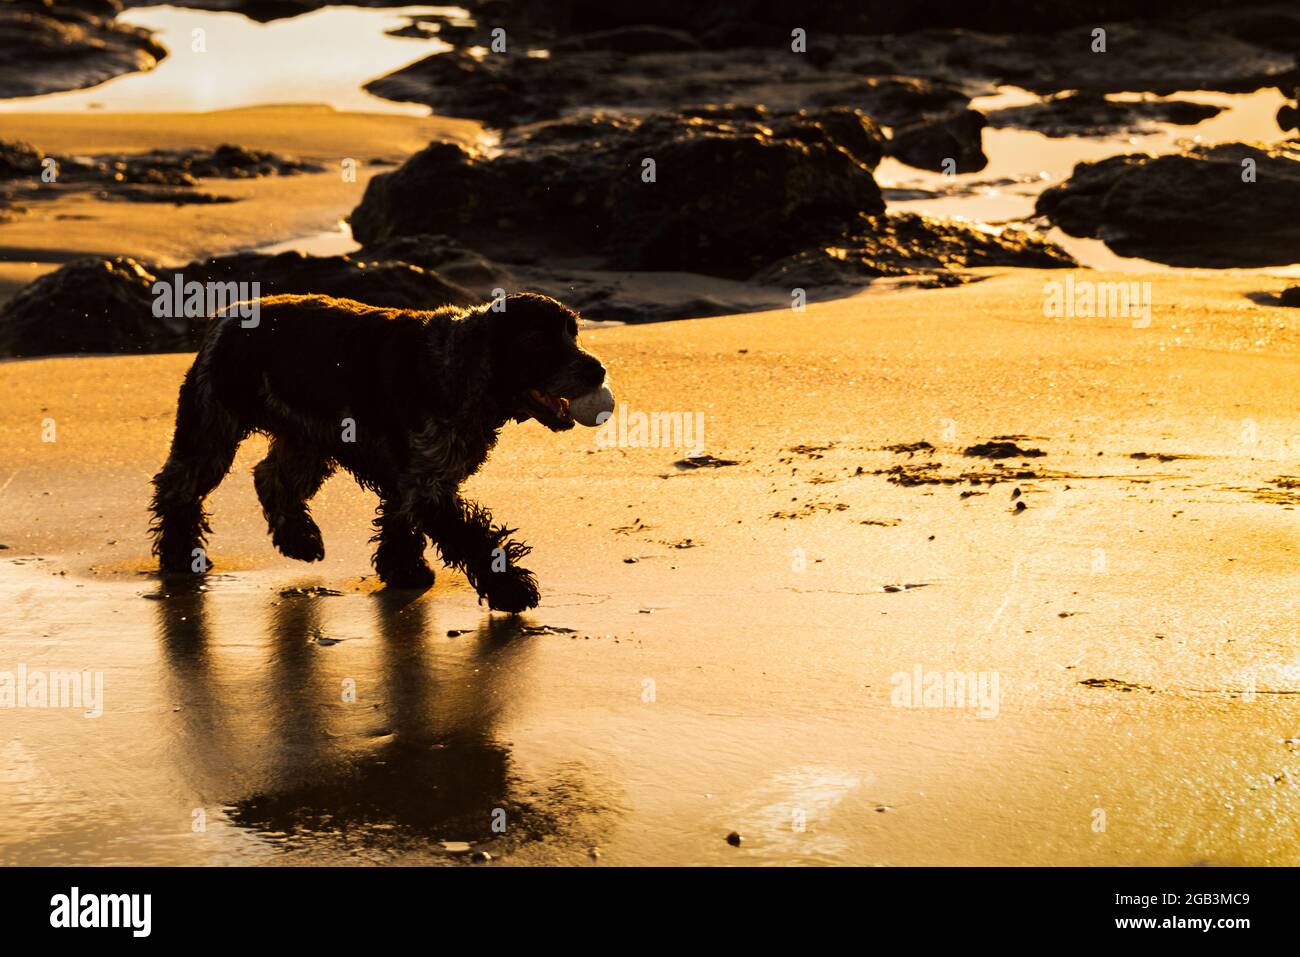 The silhouette of a small dog with ball in its mouth running at the beach during golden hour Stock Photo